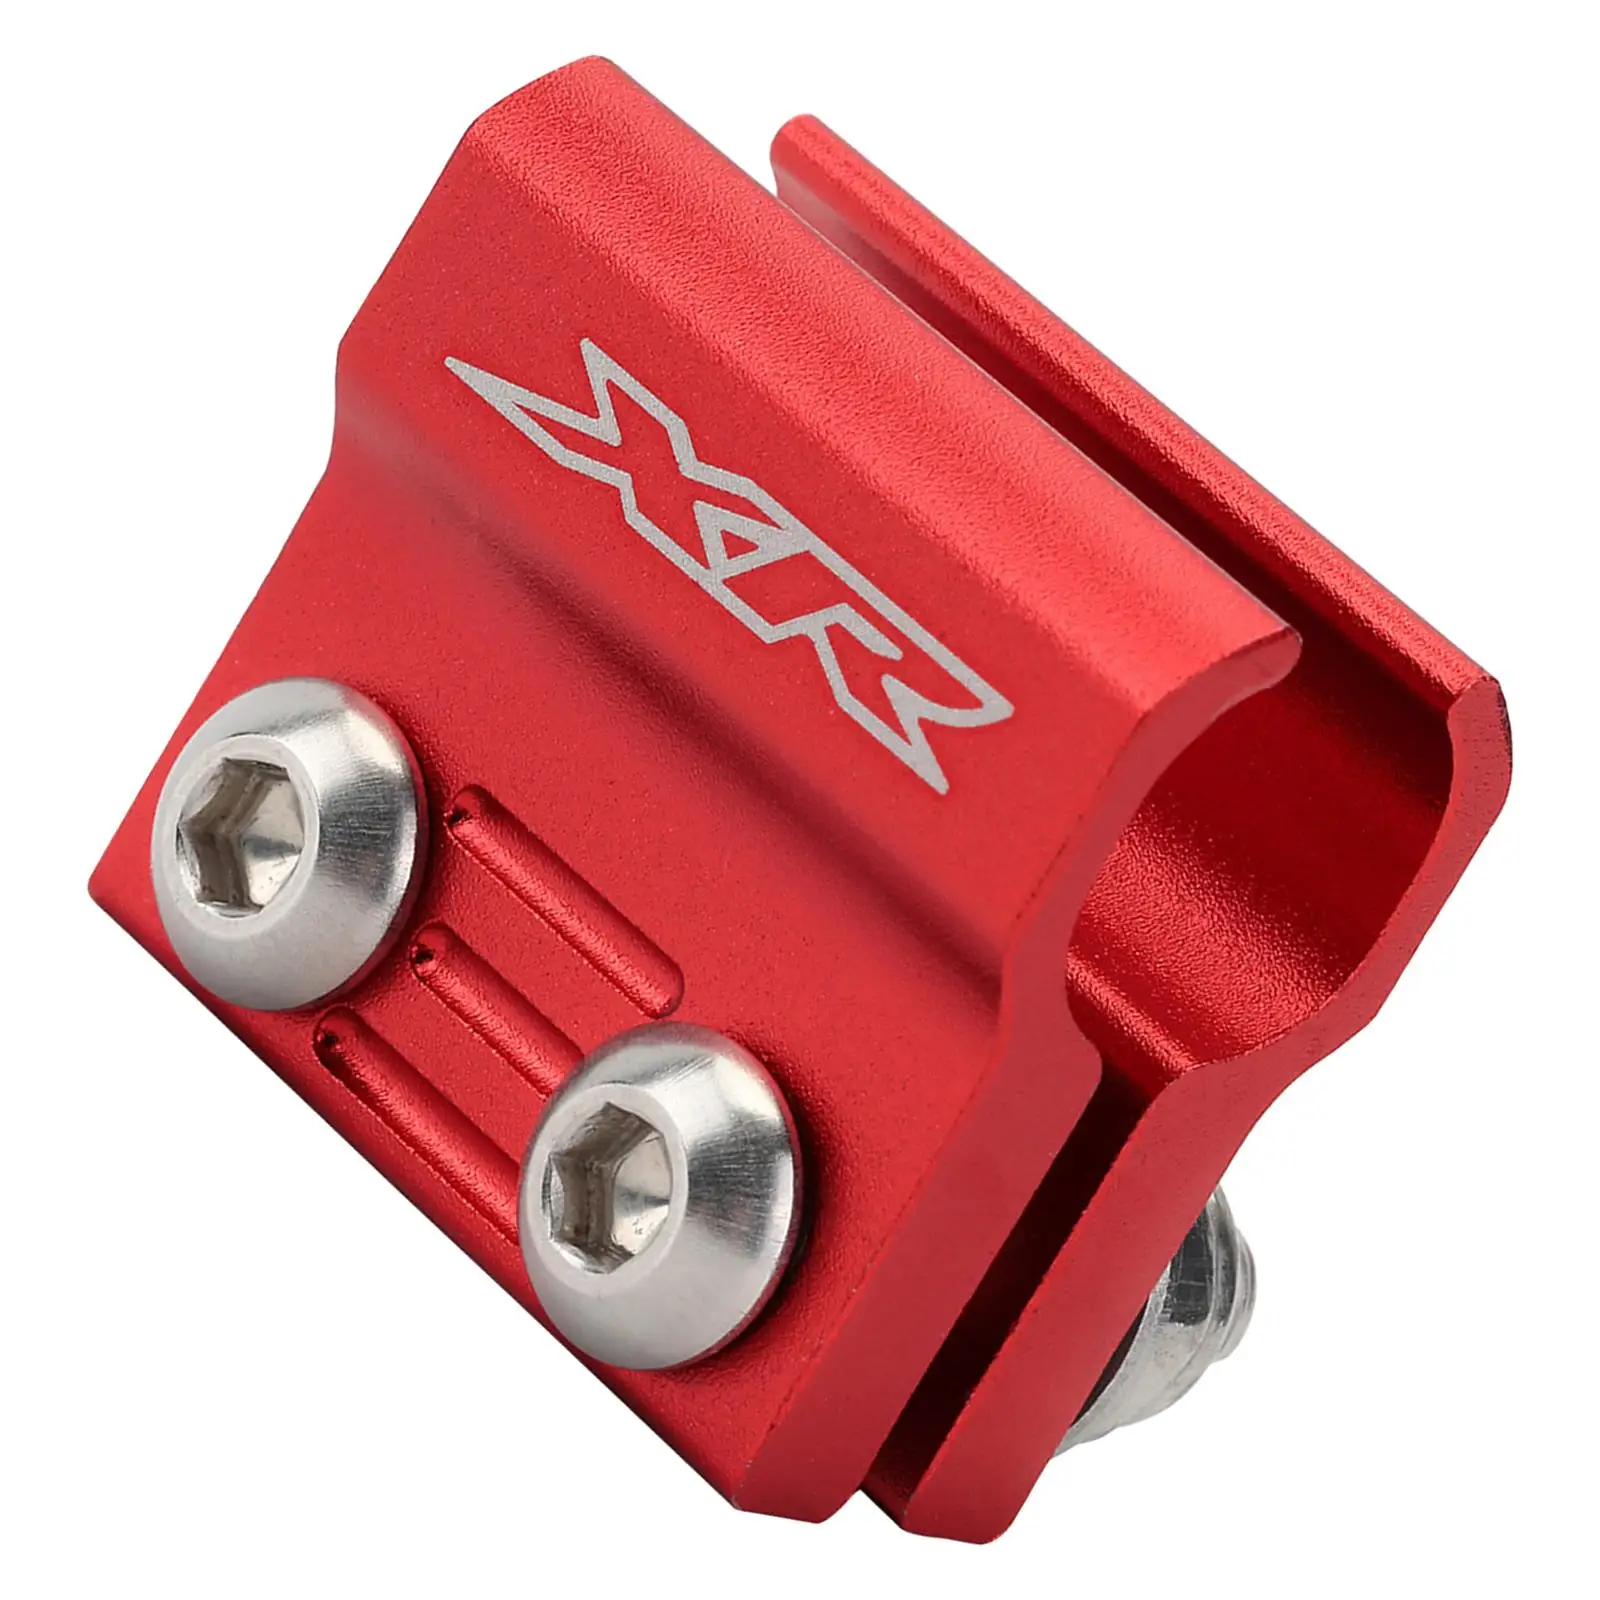 Front Brake Cable Clamp Red Aluminum Line Guide Holder for Honda XR 600R XR 650R XR 250L XR 250R Convenient Installation